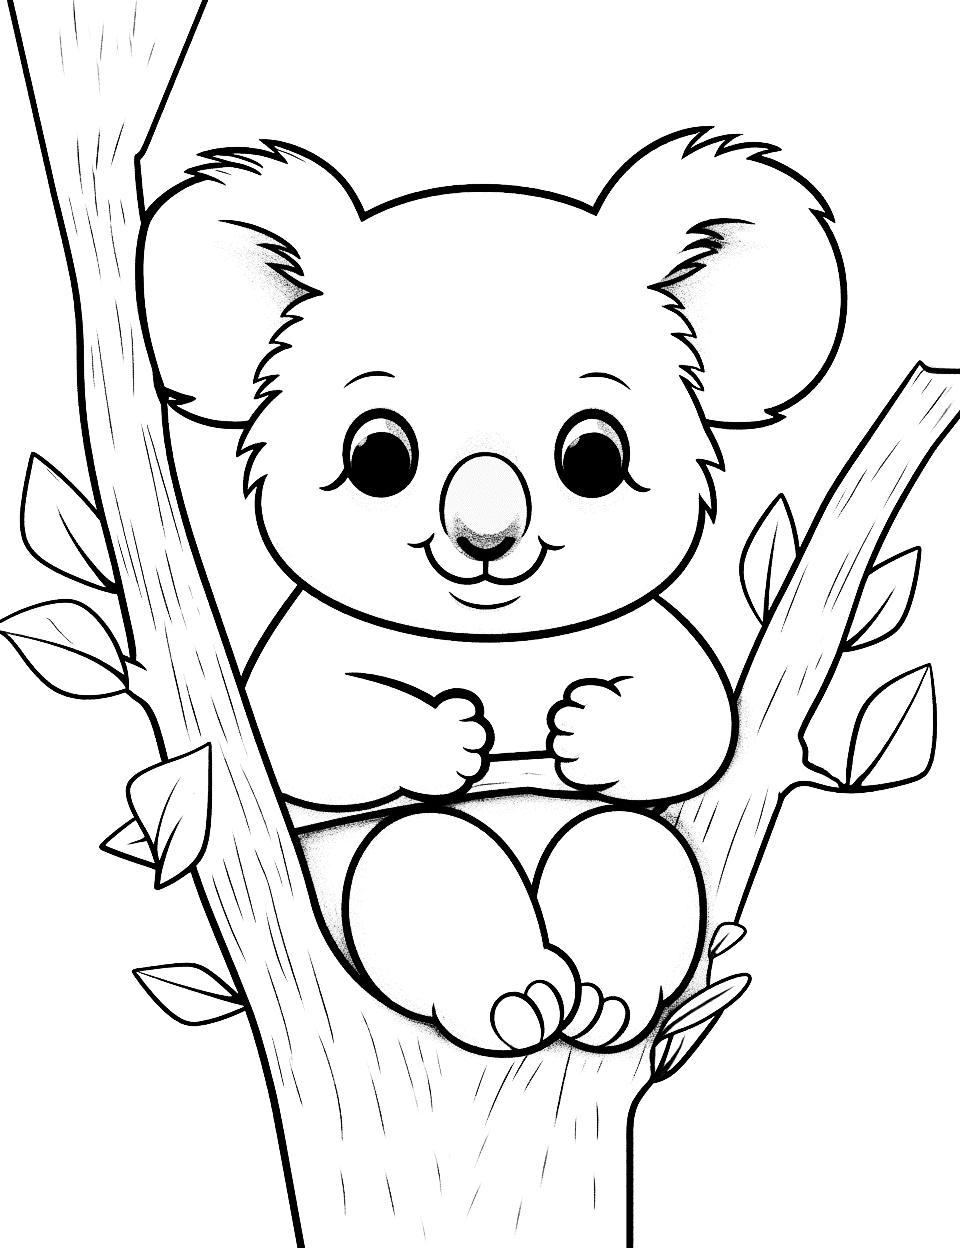 Wise Koala Animal Coloring Page - A koala perched on a tree branch with a calm and knowing expression.